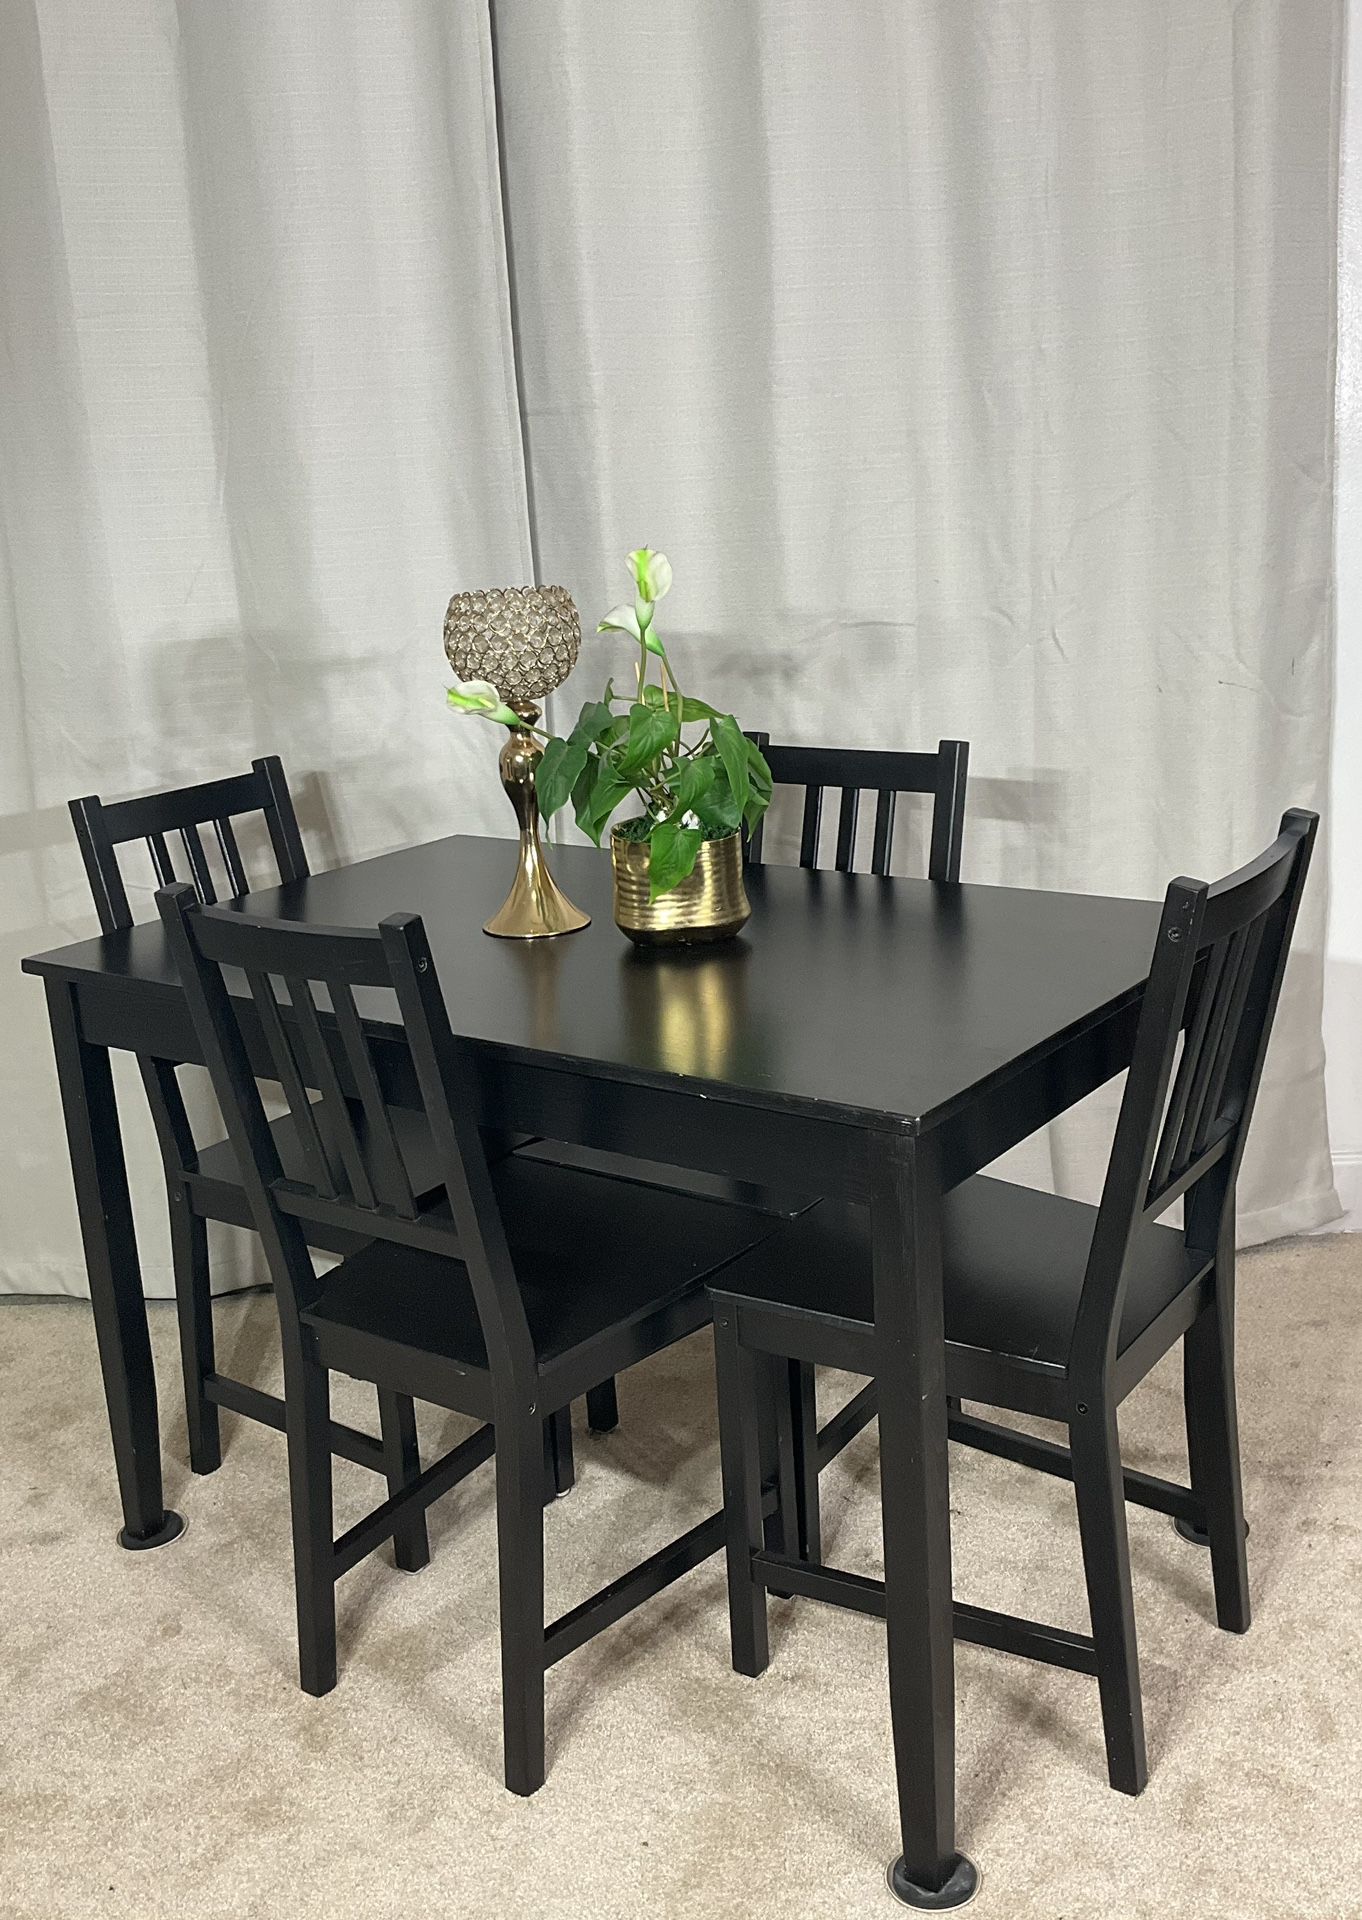 Black Compact Kitchen Dining Table & 4 Chairs PERFECT FOR SMALL PLACE 